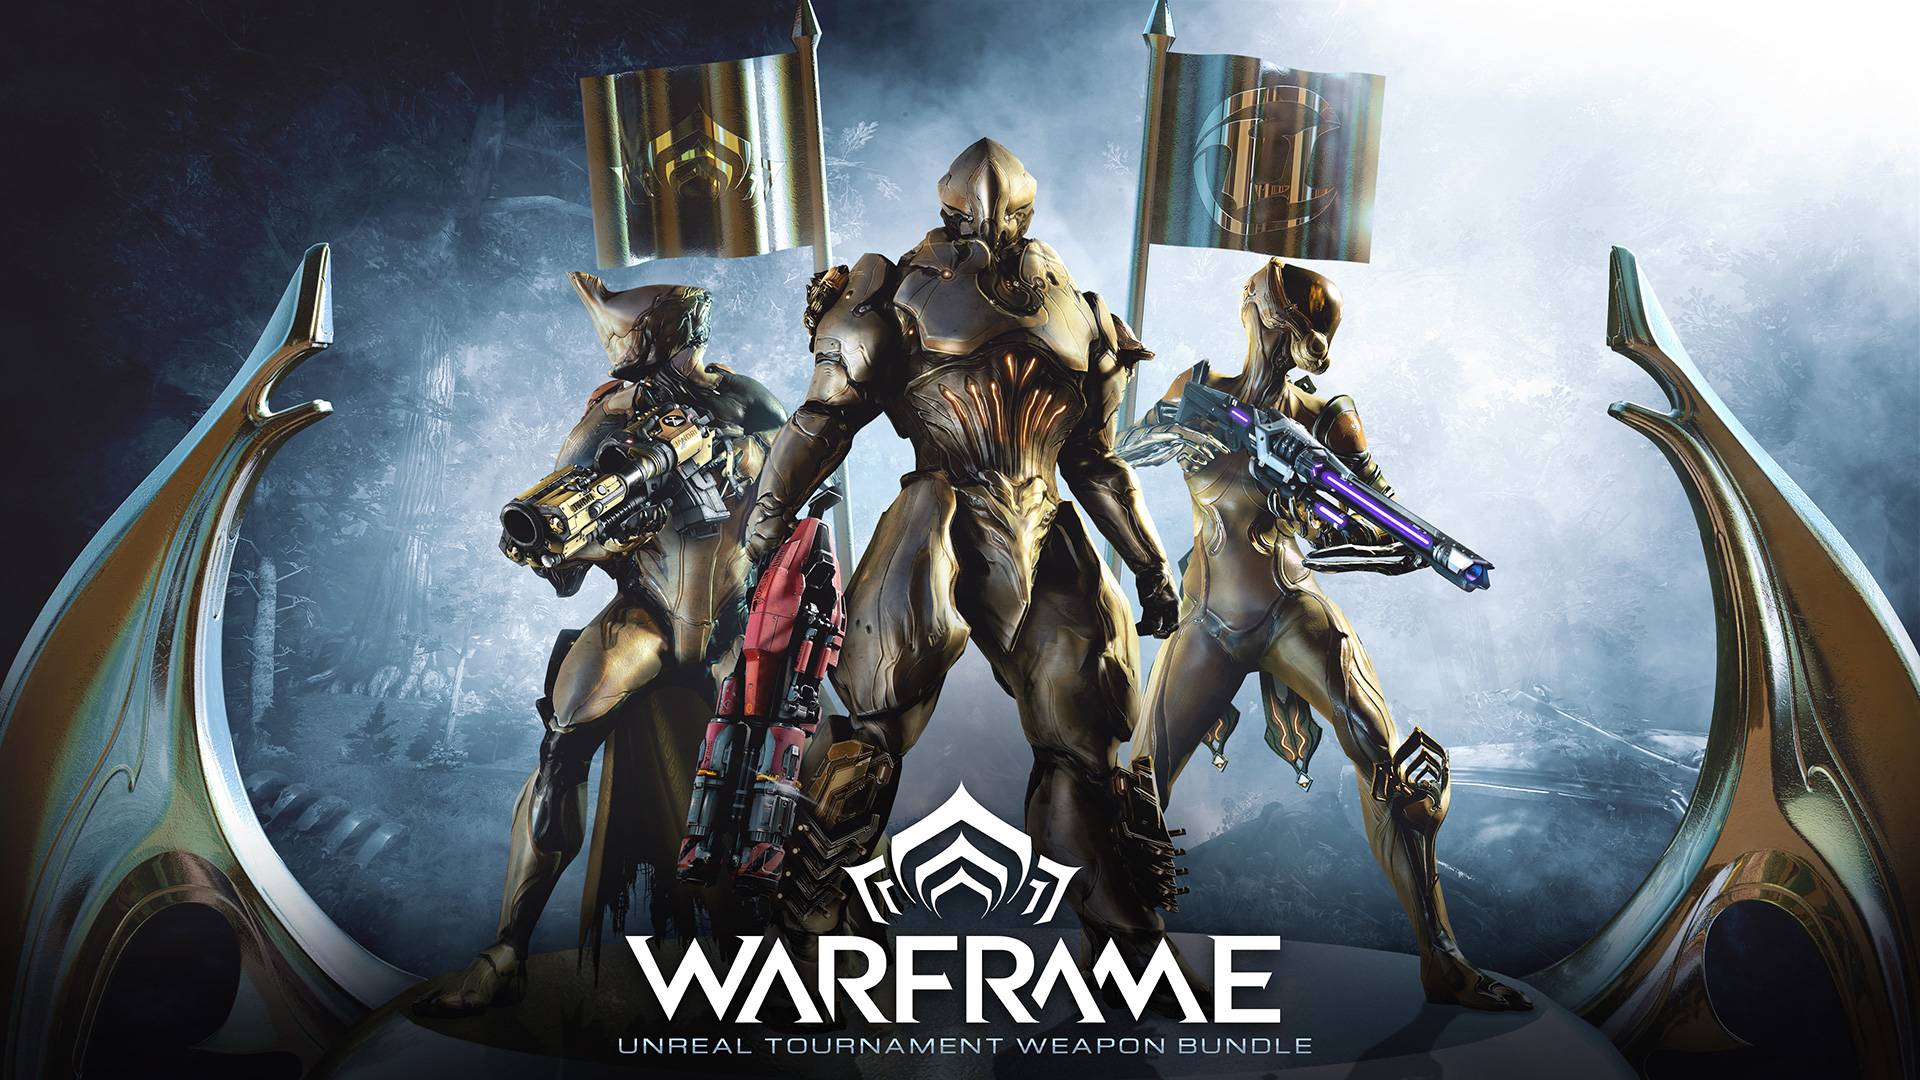 Digital Extremes invites Warframe players to celebrate its tenth anniversary with a very special live stream